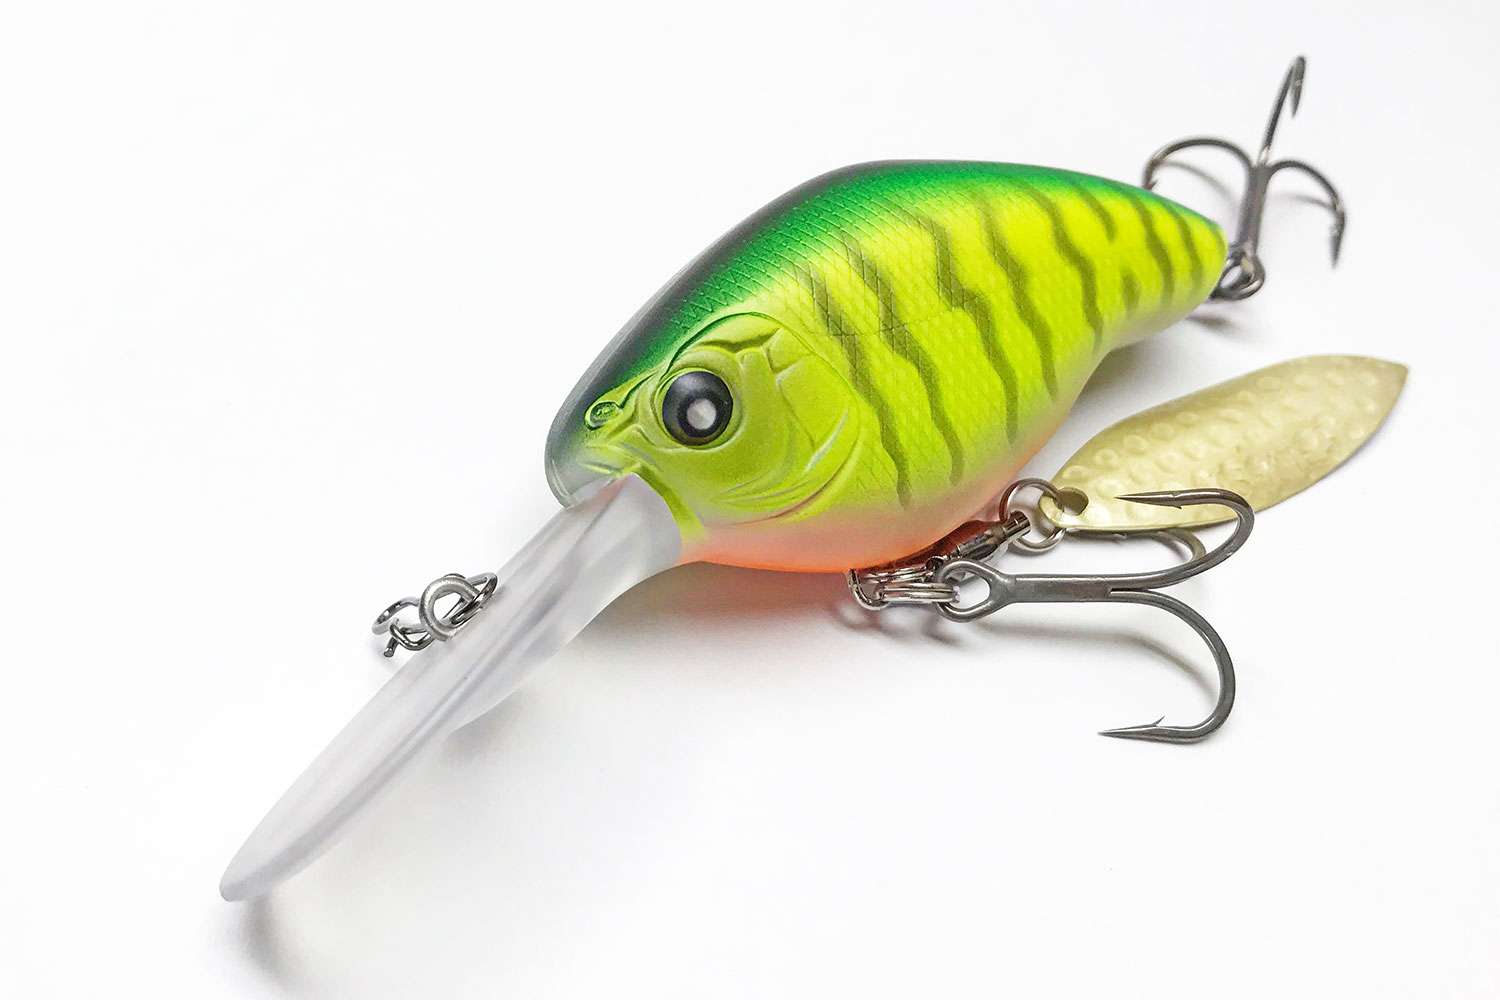     <B>Nishine Chippawa DD Blade</B><BR>
This crankbait excels in deflecting off of rocks and obstacles, and is designed to reach depths of 8 to 10 feet. It is combined with the Nishine custom flashy blade, which generates a unique metallic sound by making slight contact with the body of the bait. Available sizes: 2.4 inches; Weight: 0.69 ounces.
<BR>

    <B>MSRP: $17.00</B> <br>

    <a href=